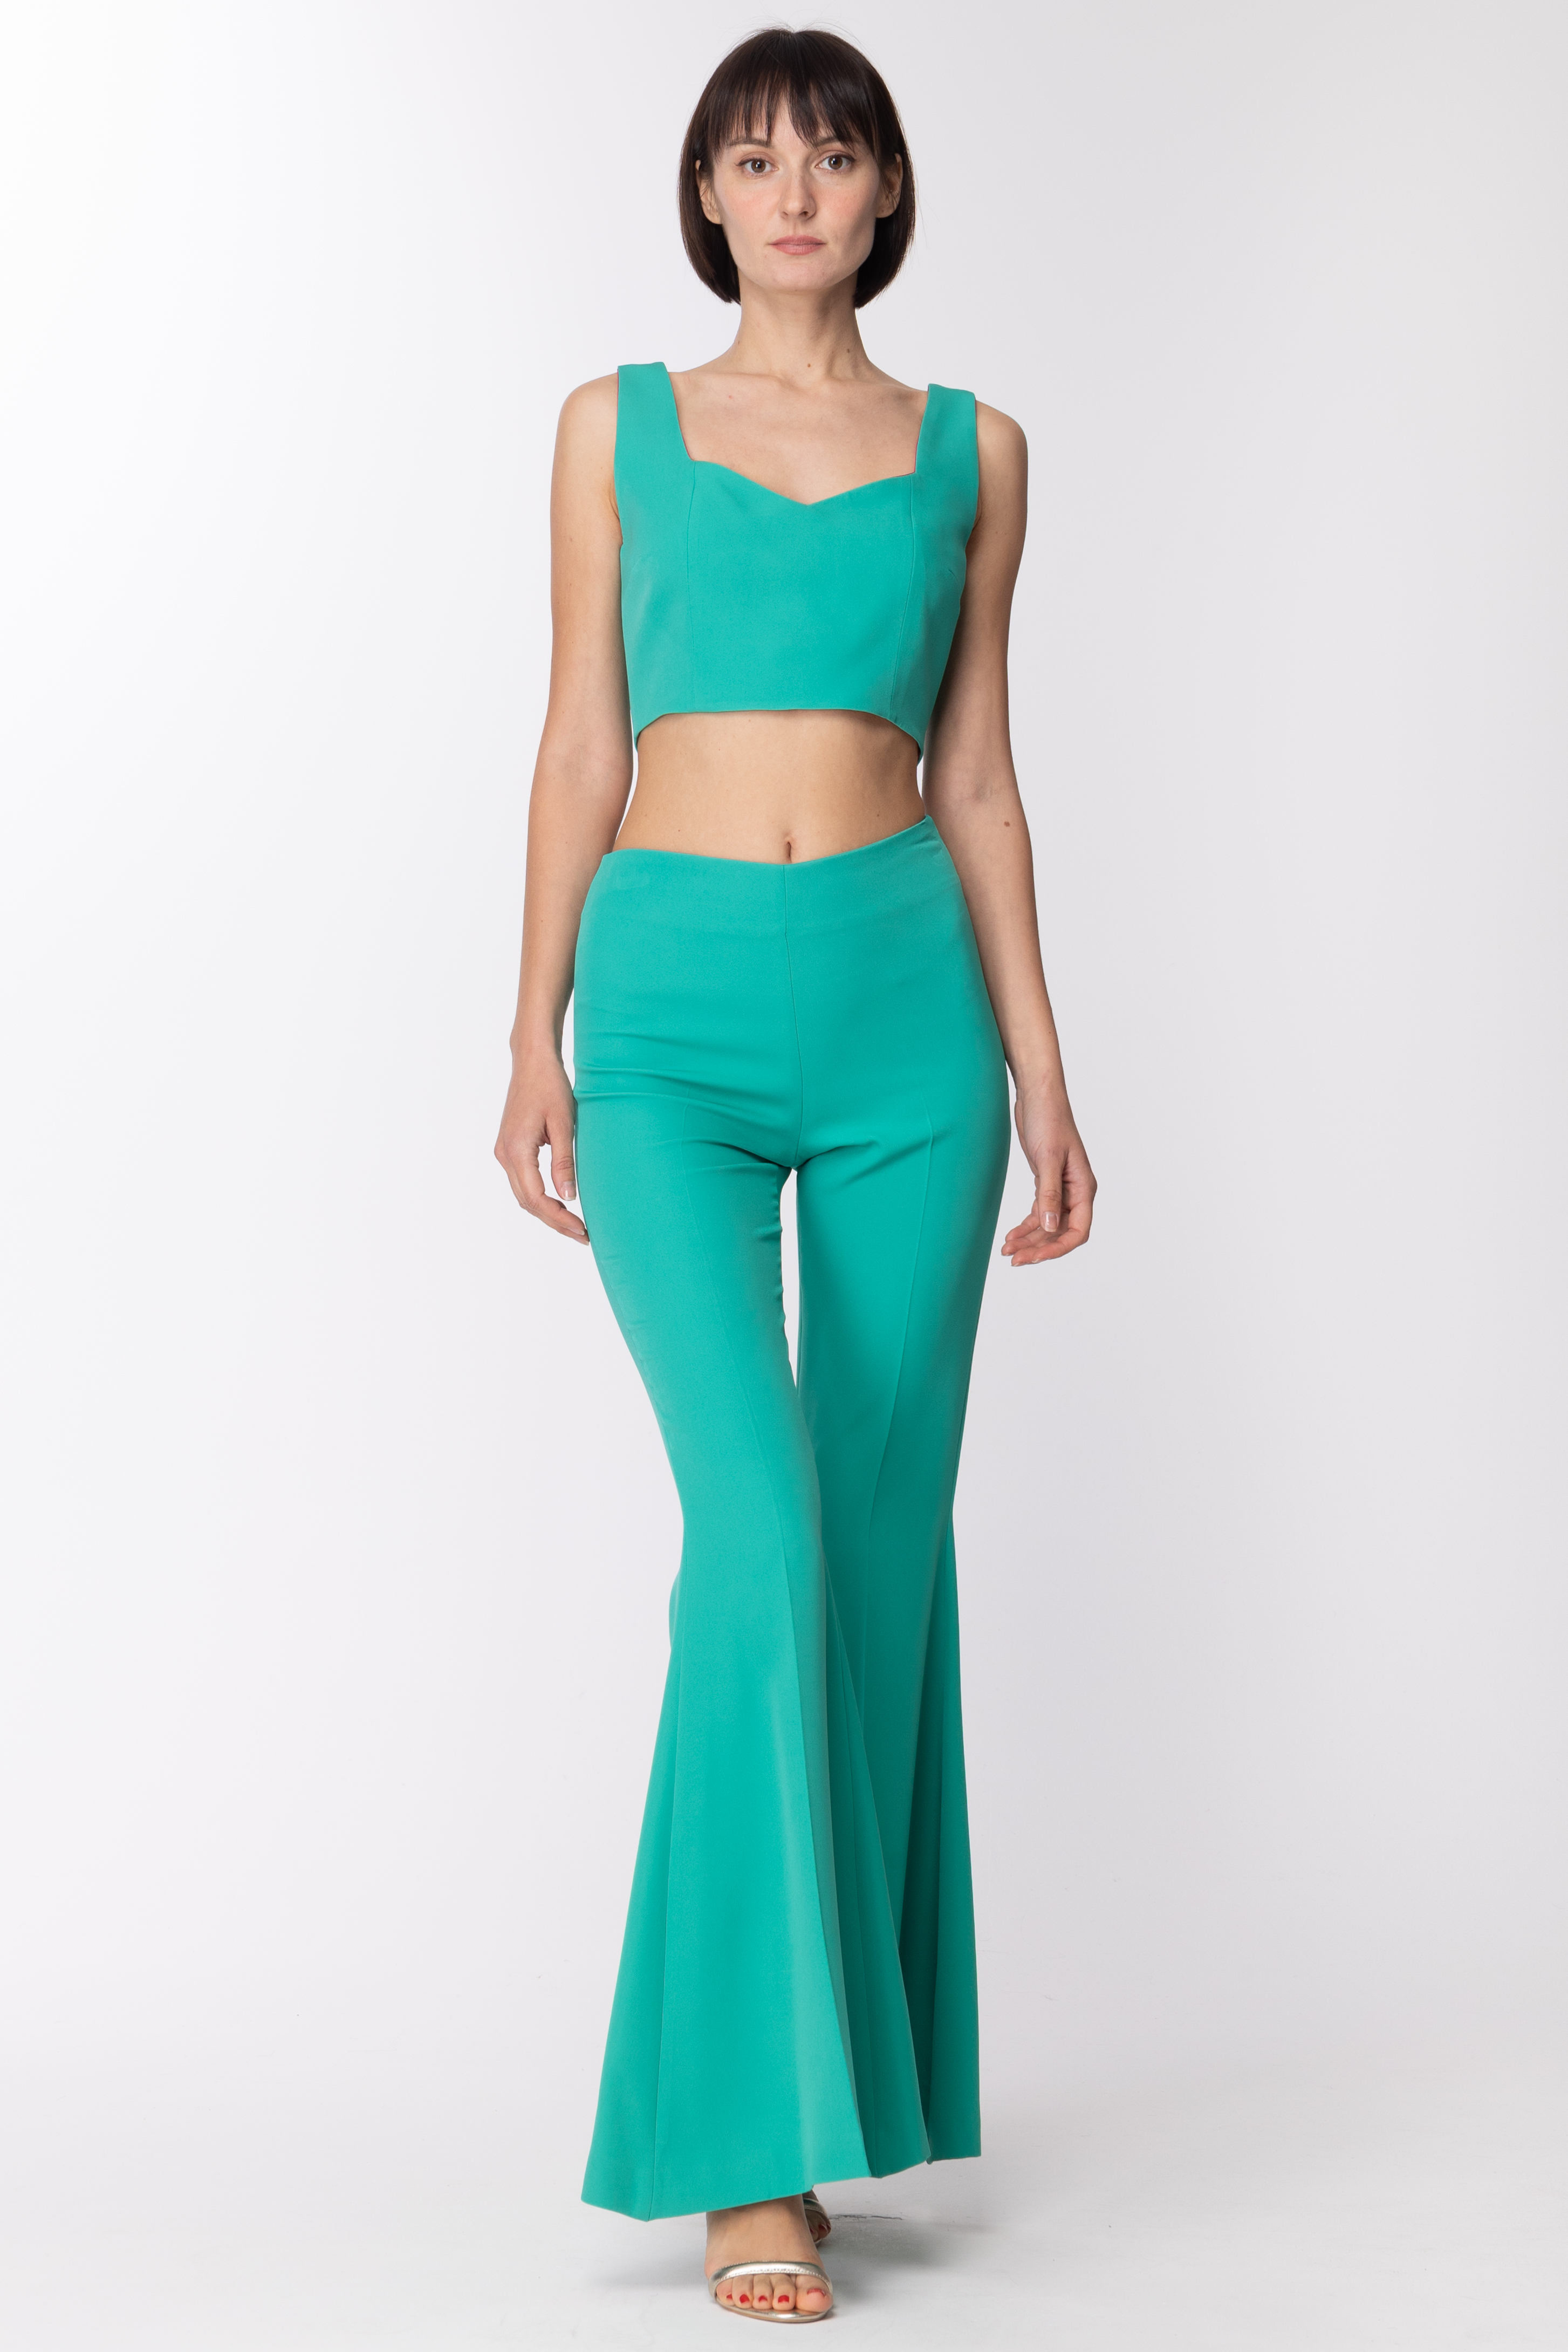 Preview: Dramèe Crop top with sweetheart neckline Verde